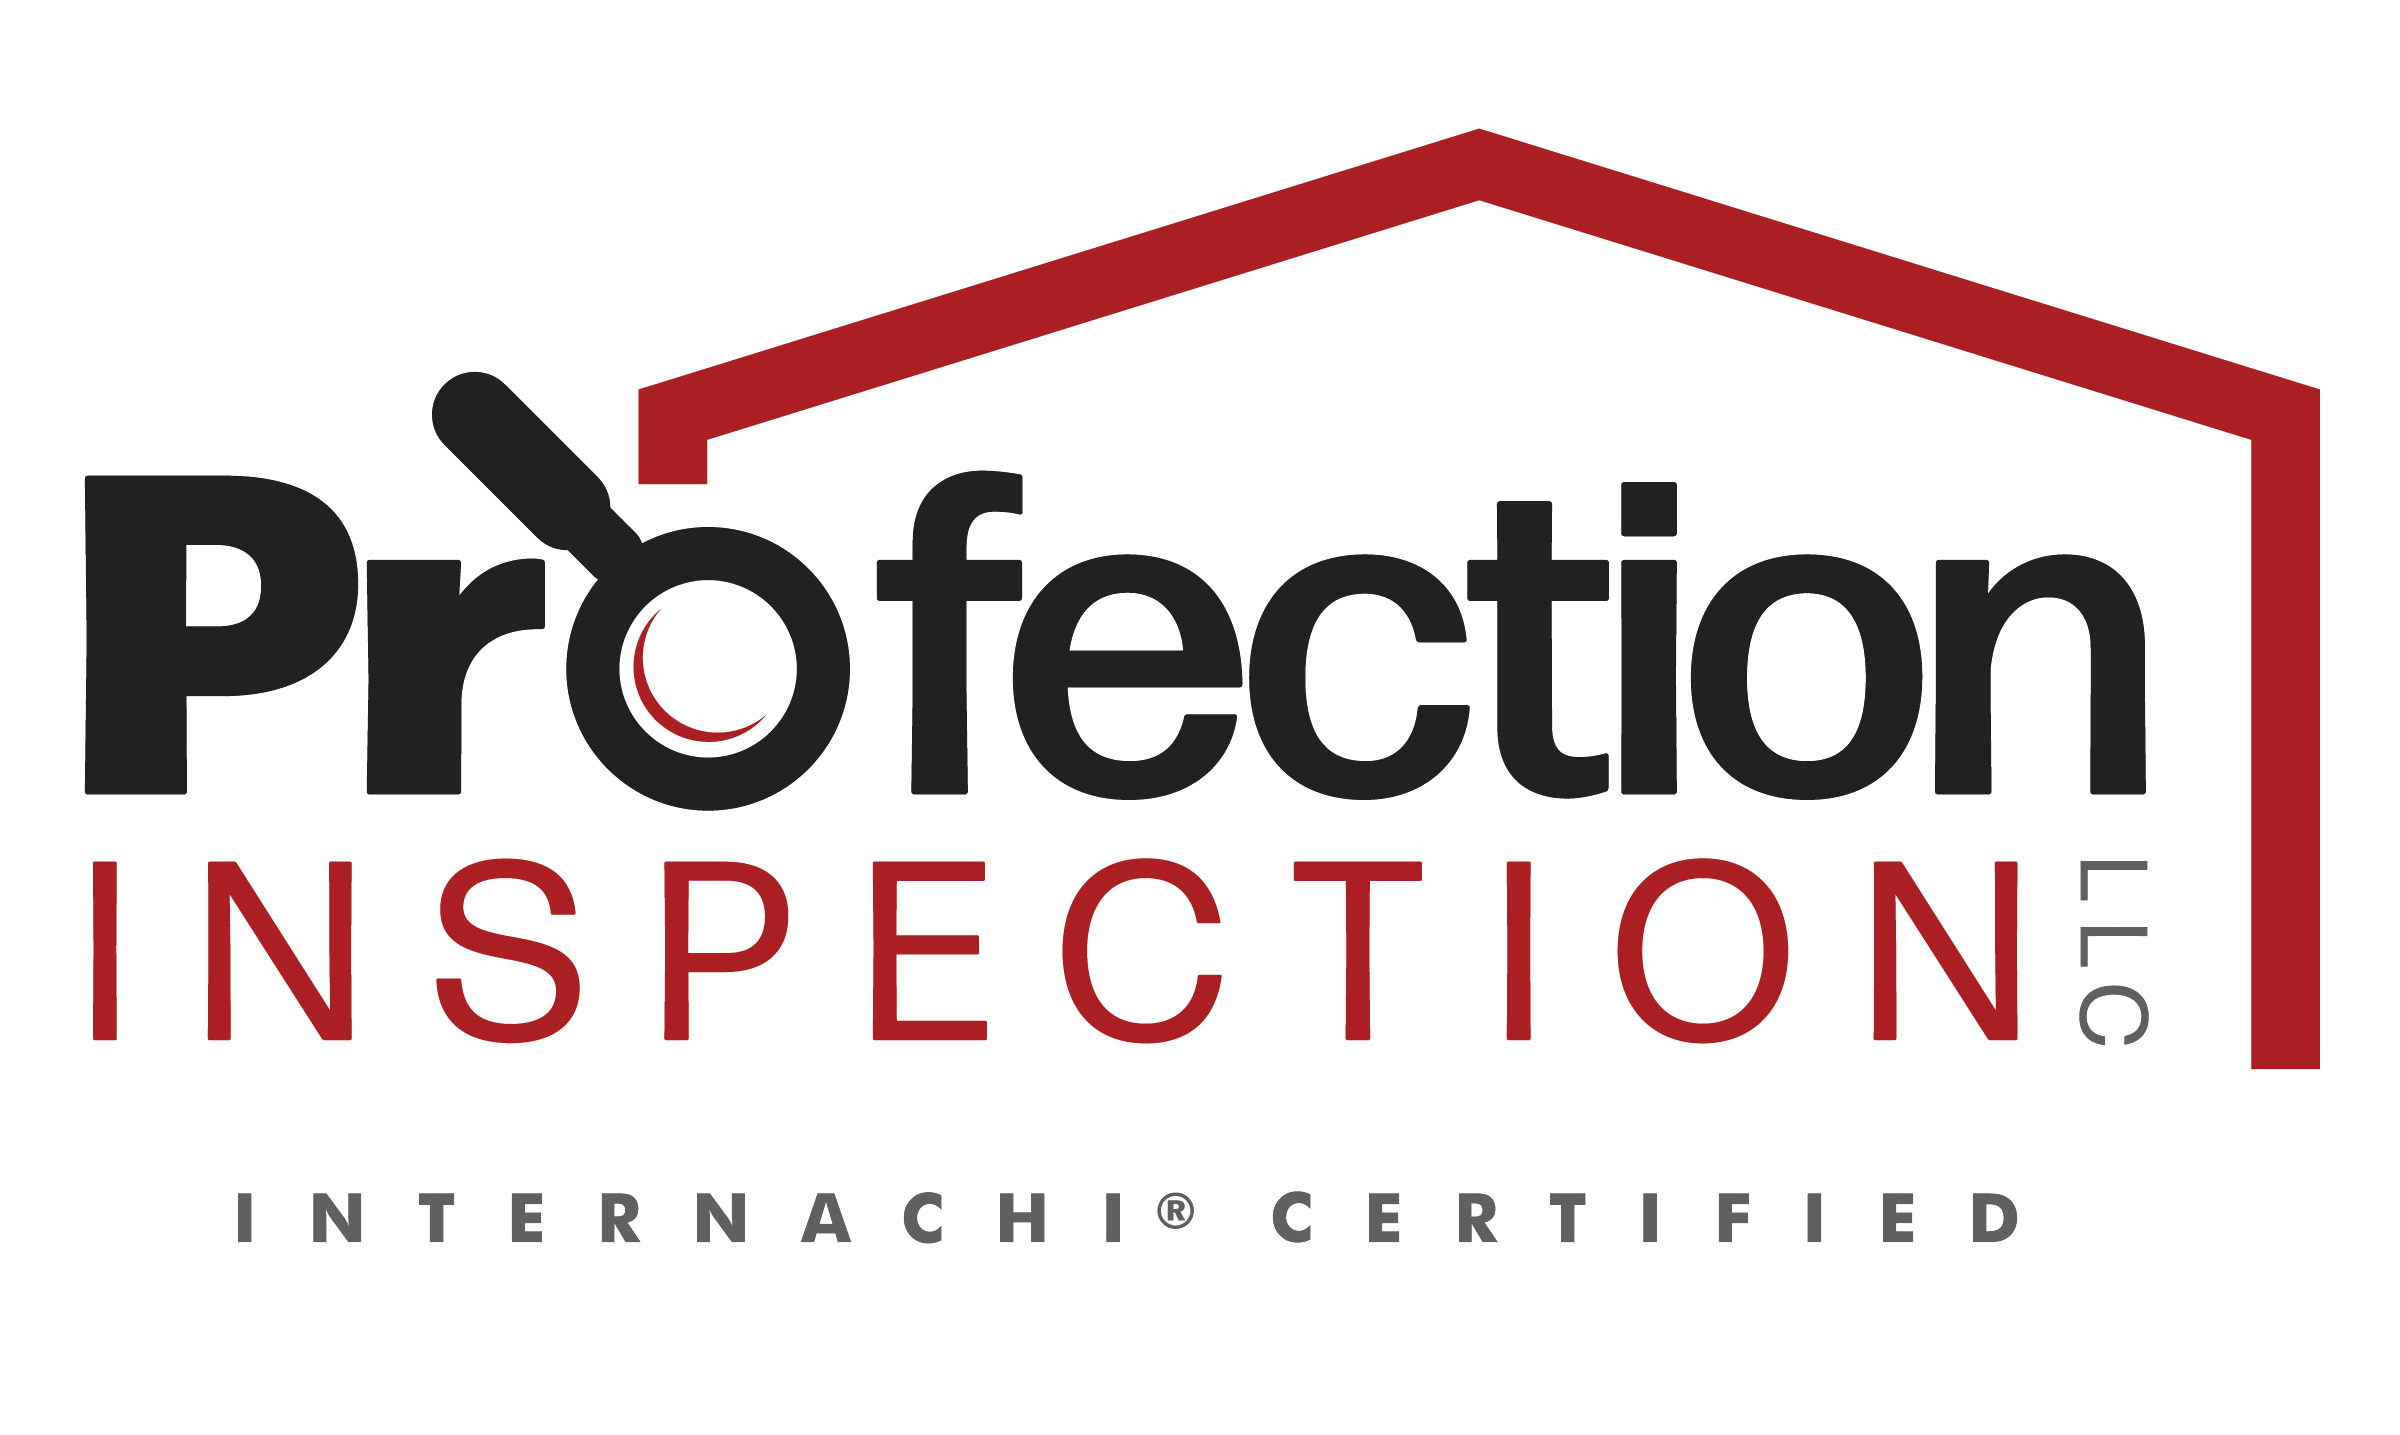 Home Inspector Randy Brewer with Profection Inspection